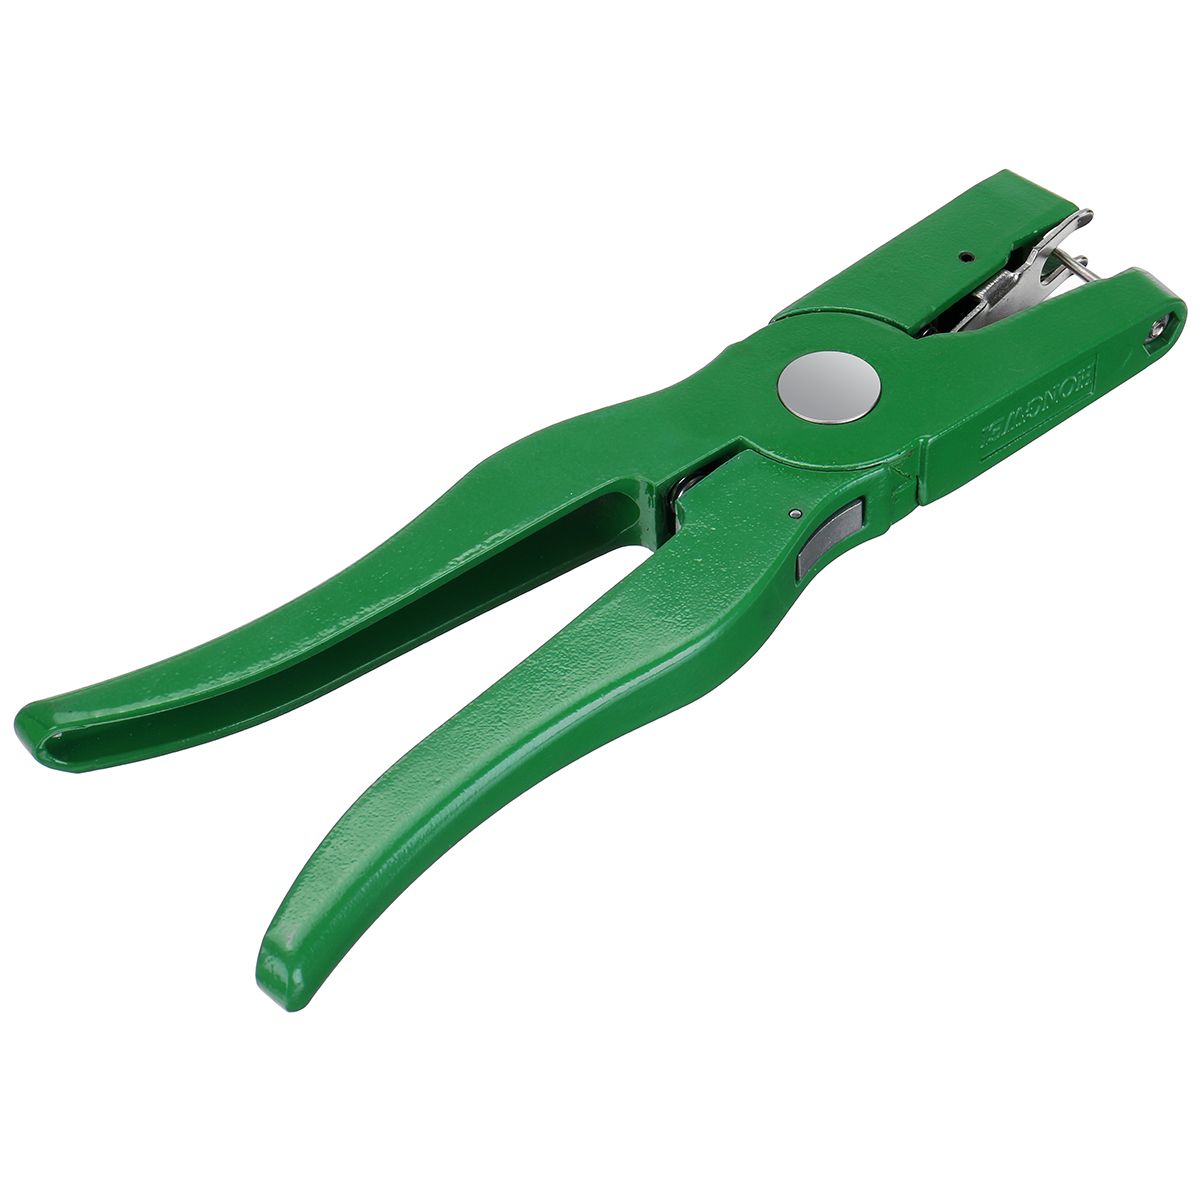 001-100-Number-Animal-Livestock-Ear-Tag-Cattle-Cow-Pig-LabelApplicator-Plier-1753760